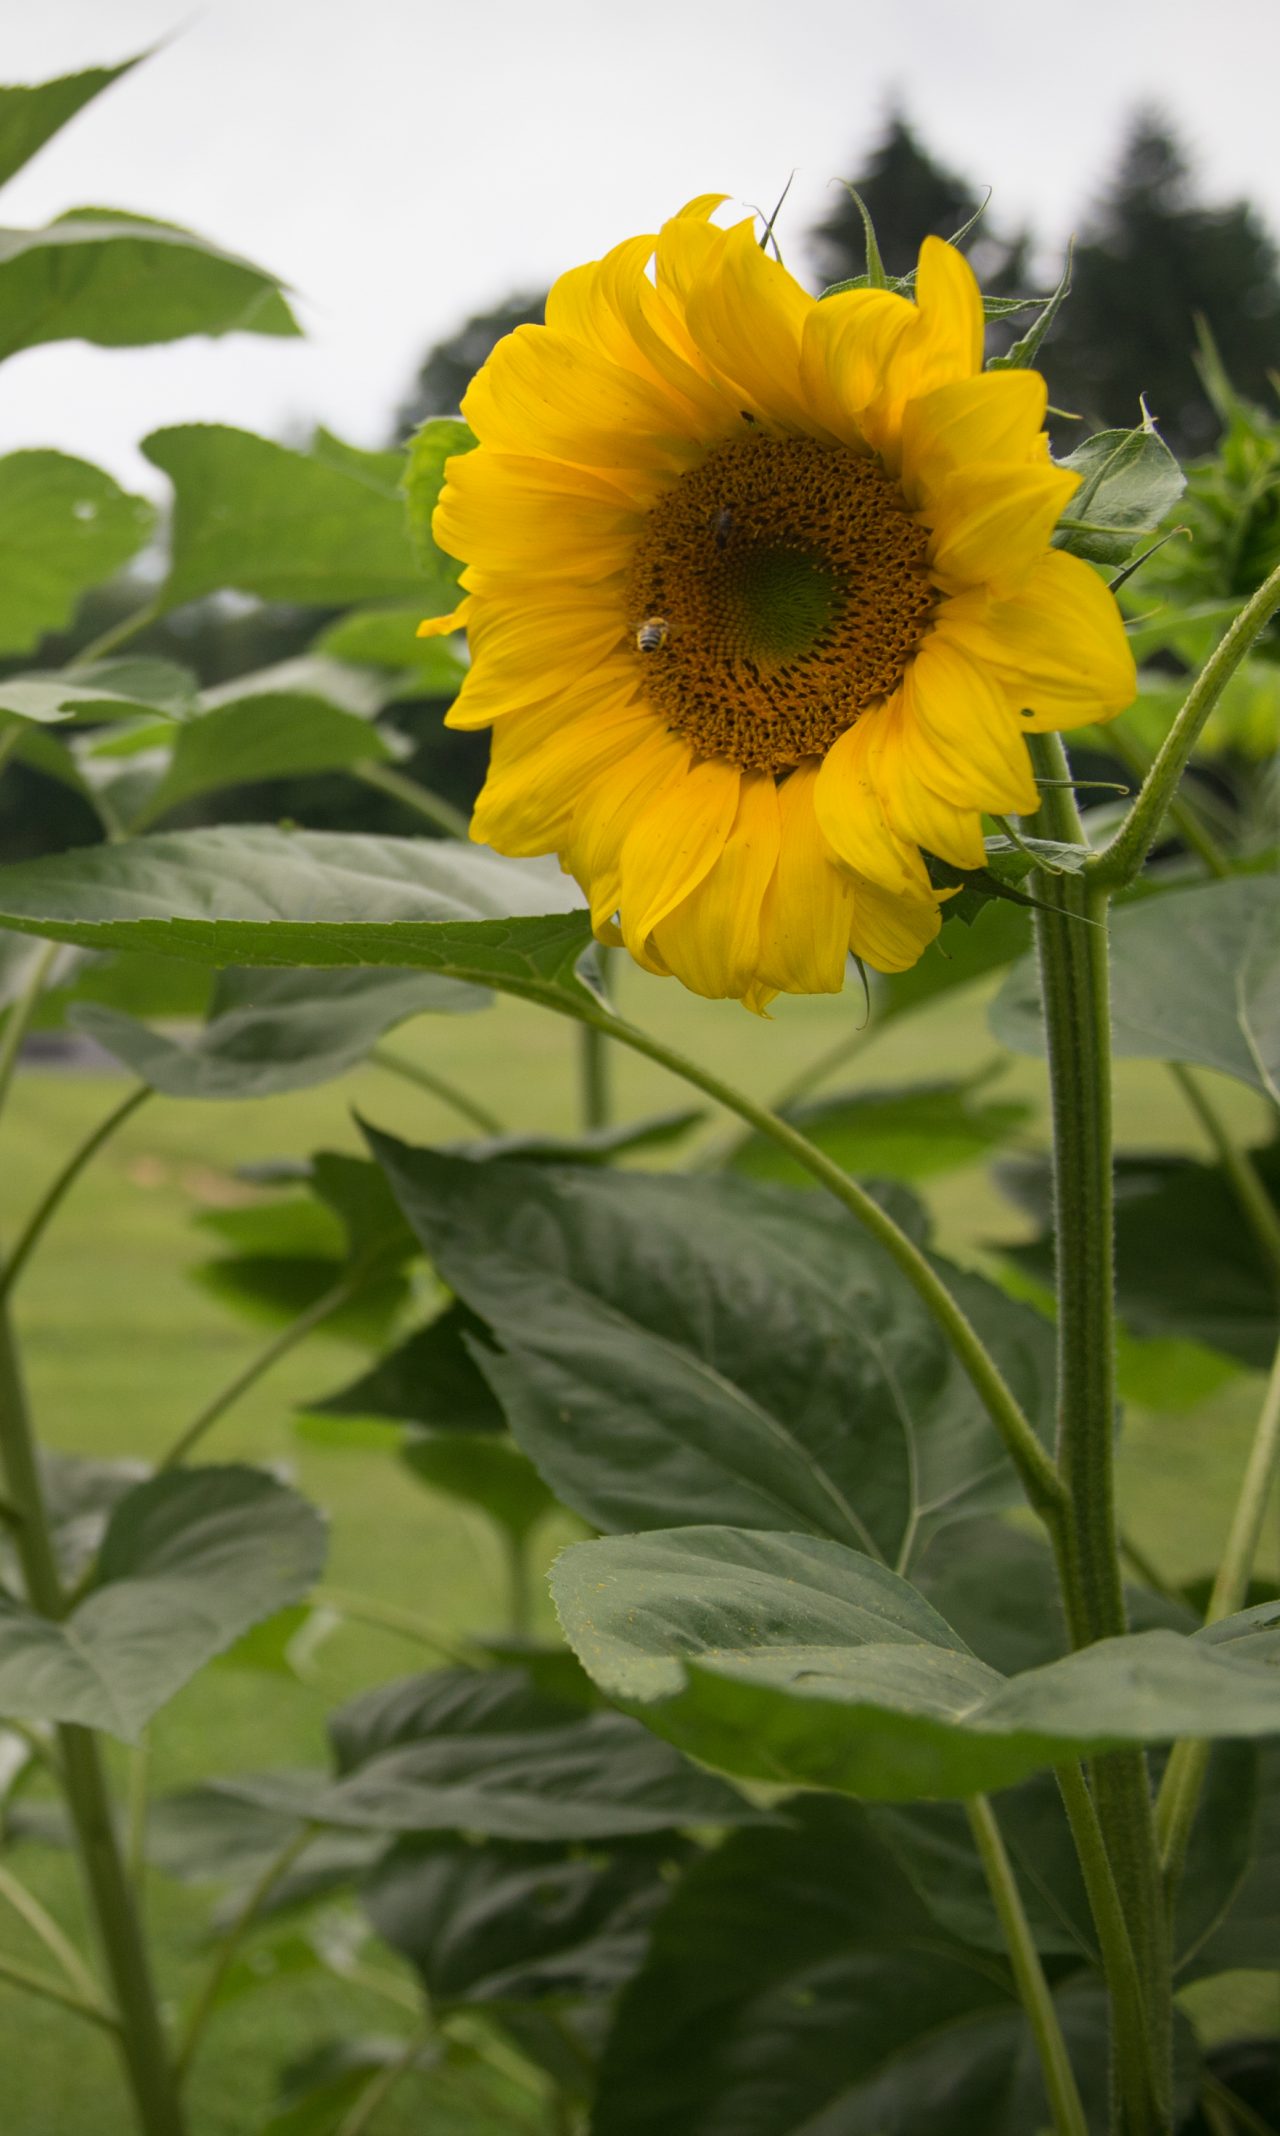 A sunflower blooming on a farm.